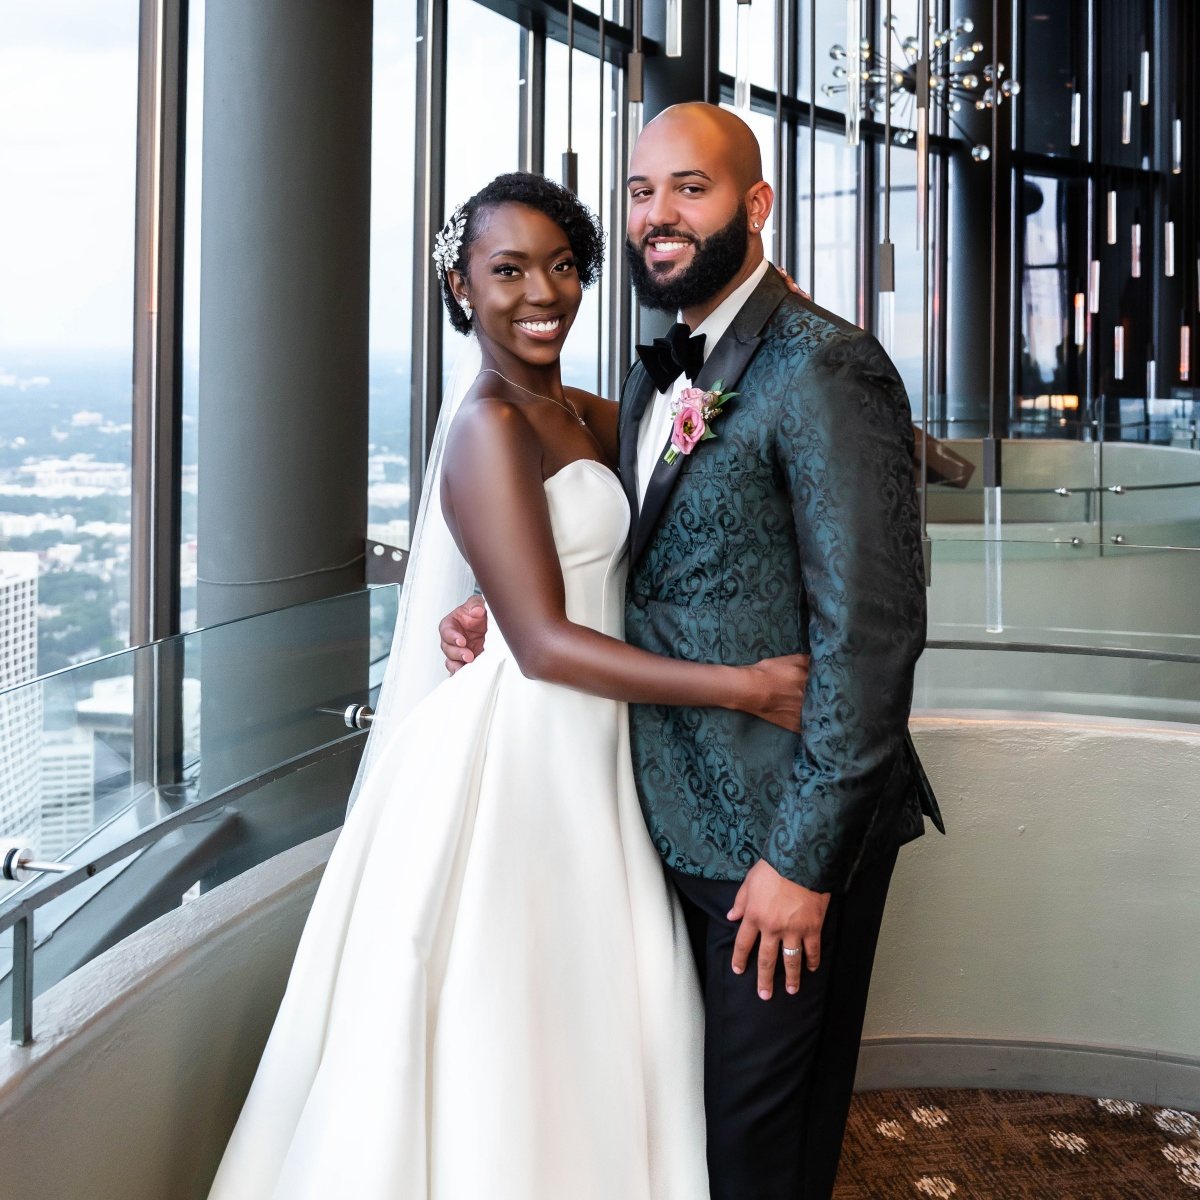 Meet the Married at First Sight Couples Ready for Love in Season 12